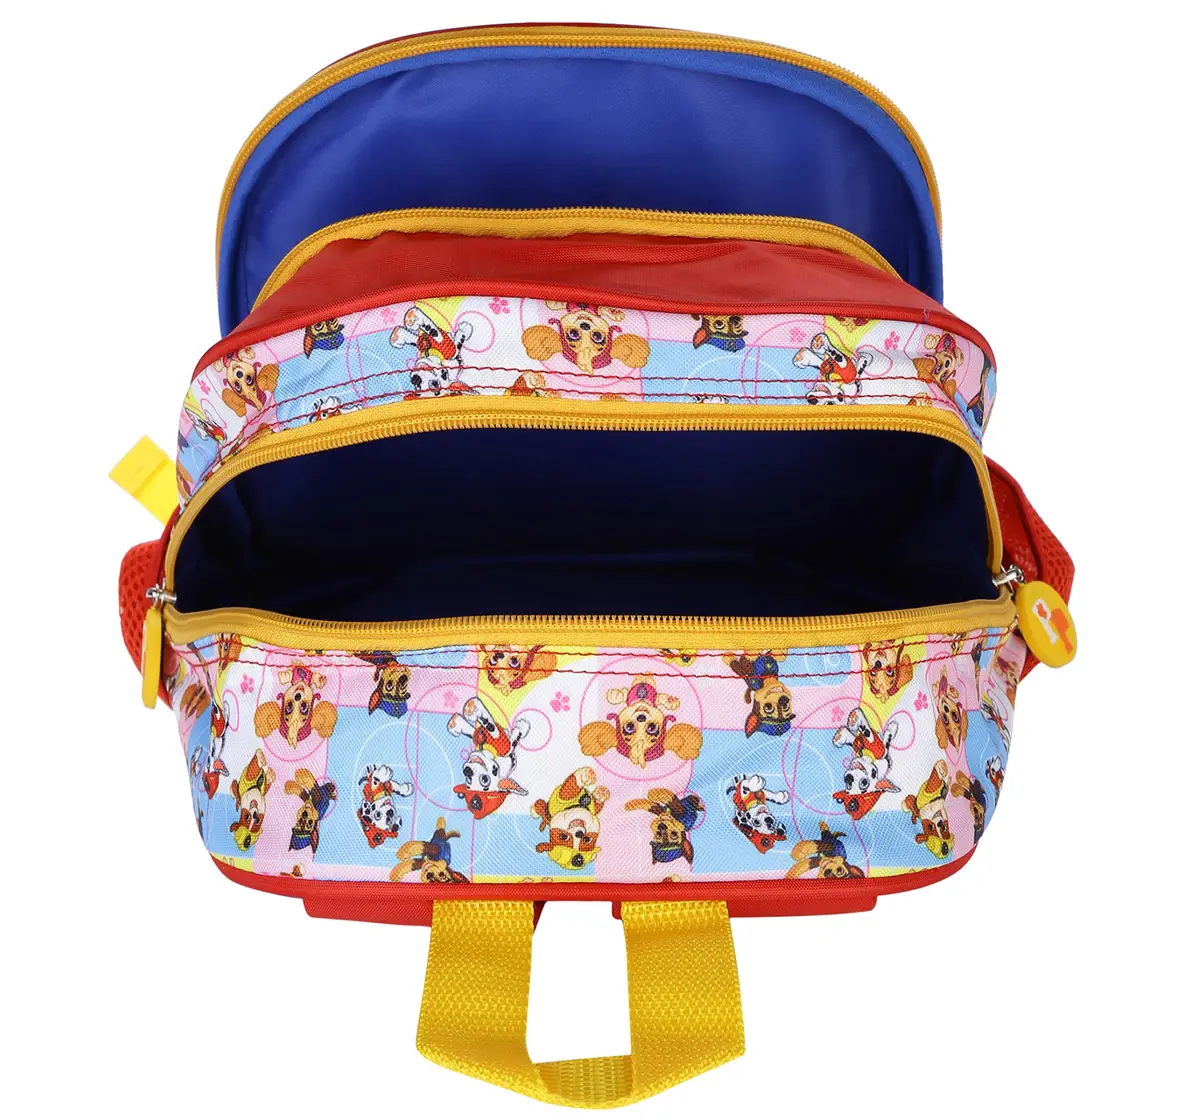 OLE BABY Cute ABC Mother Diaper Bag Pure Cotton Baby Bag/Nappy Bag/Diaper  Tote/Stroller Straps bag/Diaper Bag/Mummy Bag/Handbag/Travel Organizer Bag/Multi-function  Jumbo Diaper Bag Diaper Bag - Buy Baby Care Products in India |